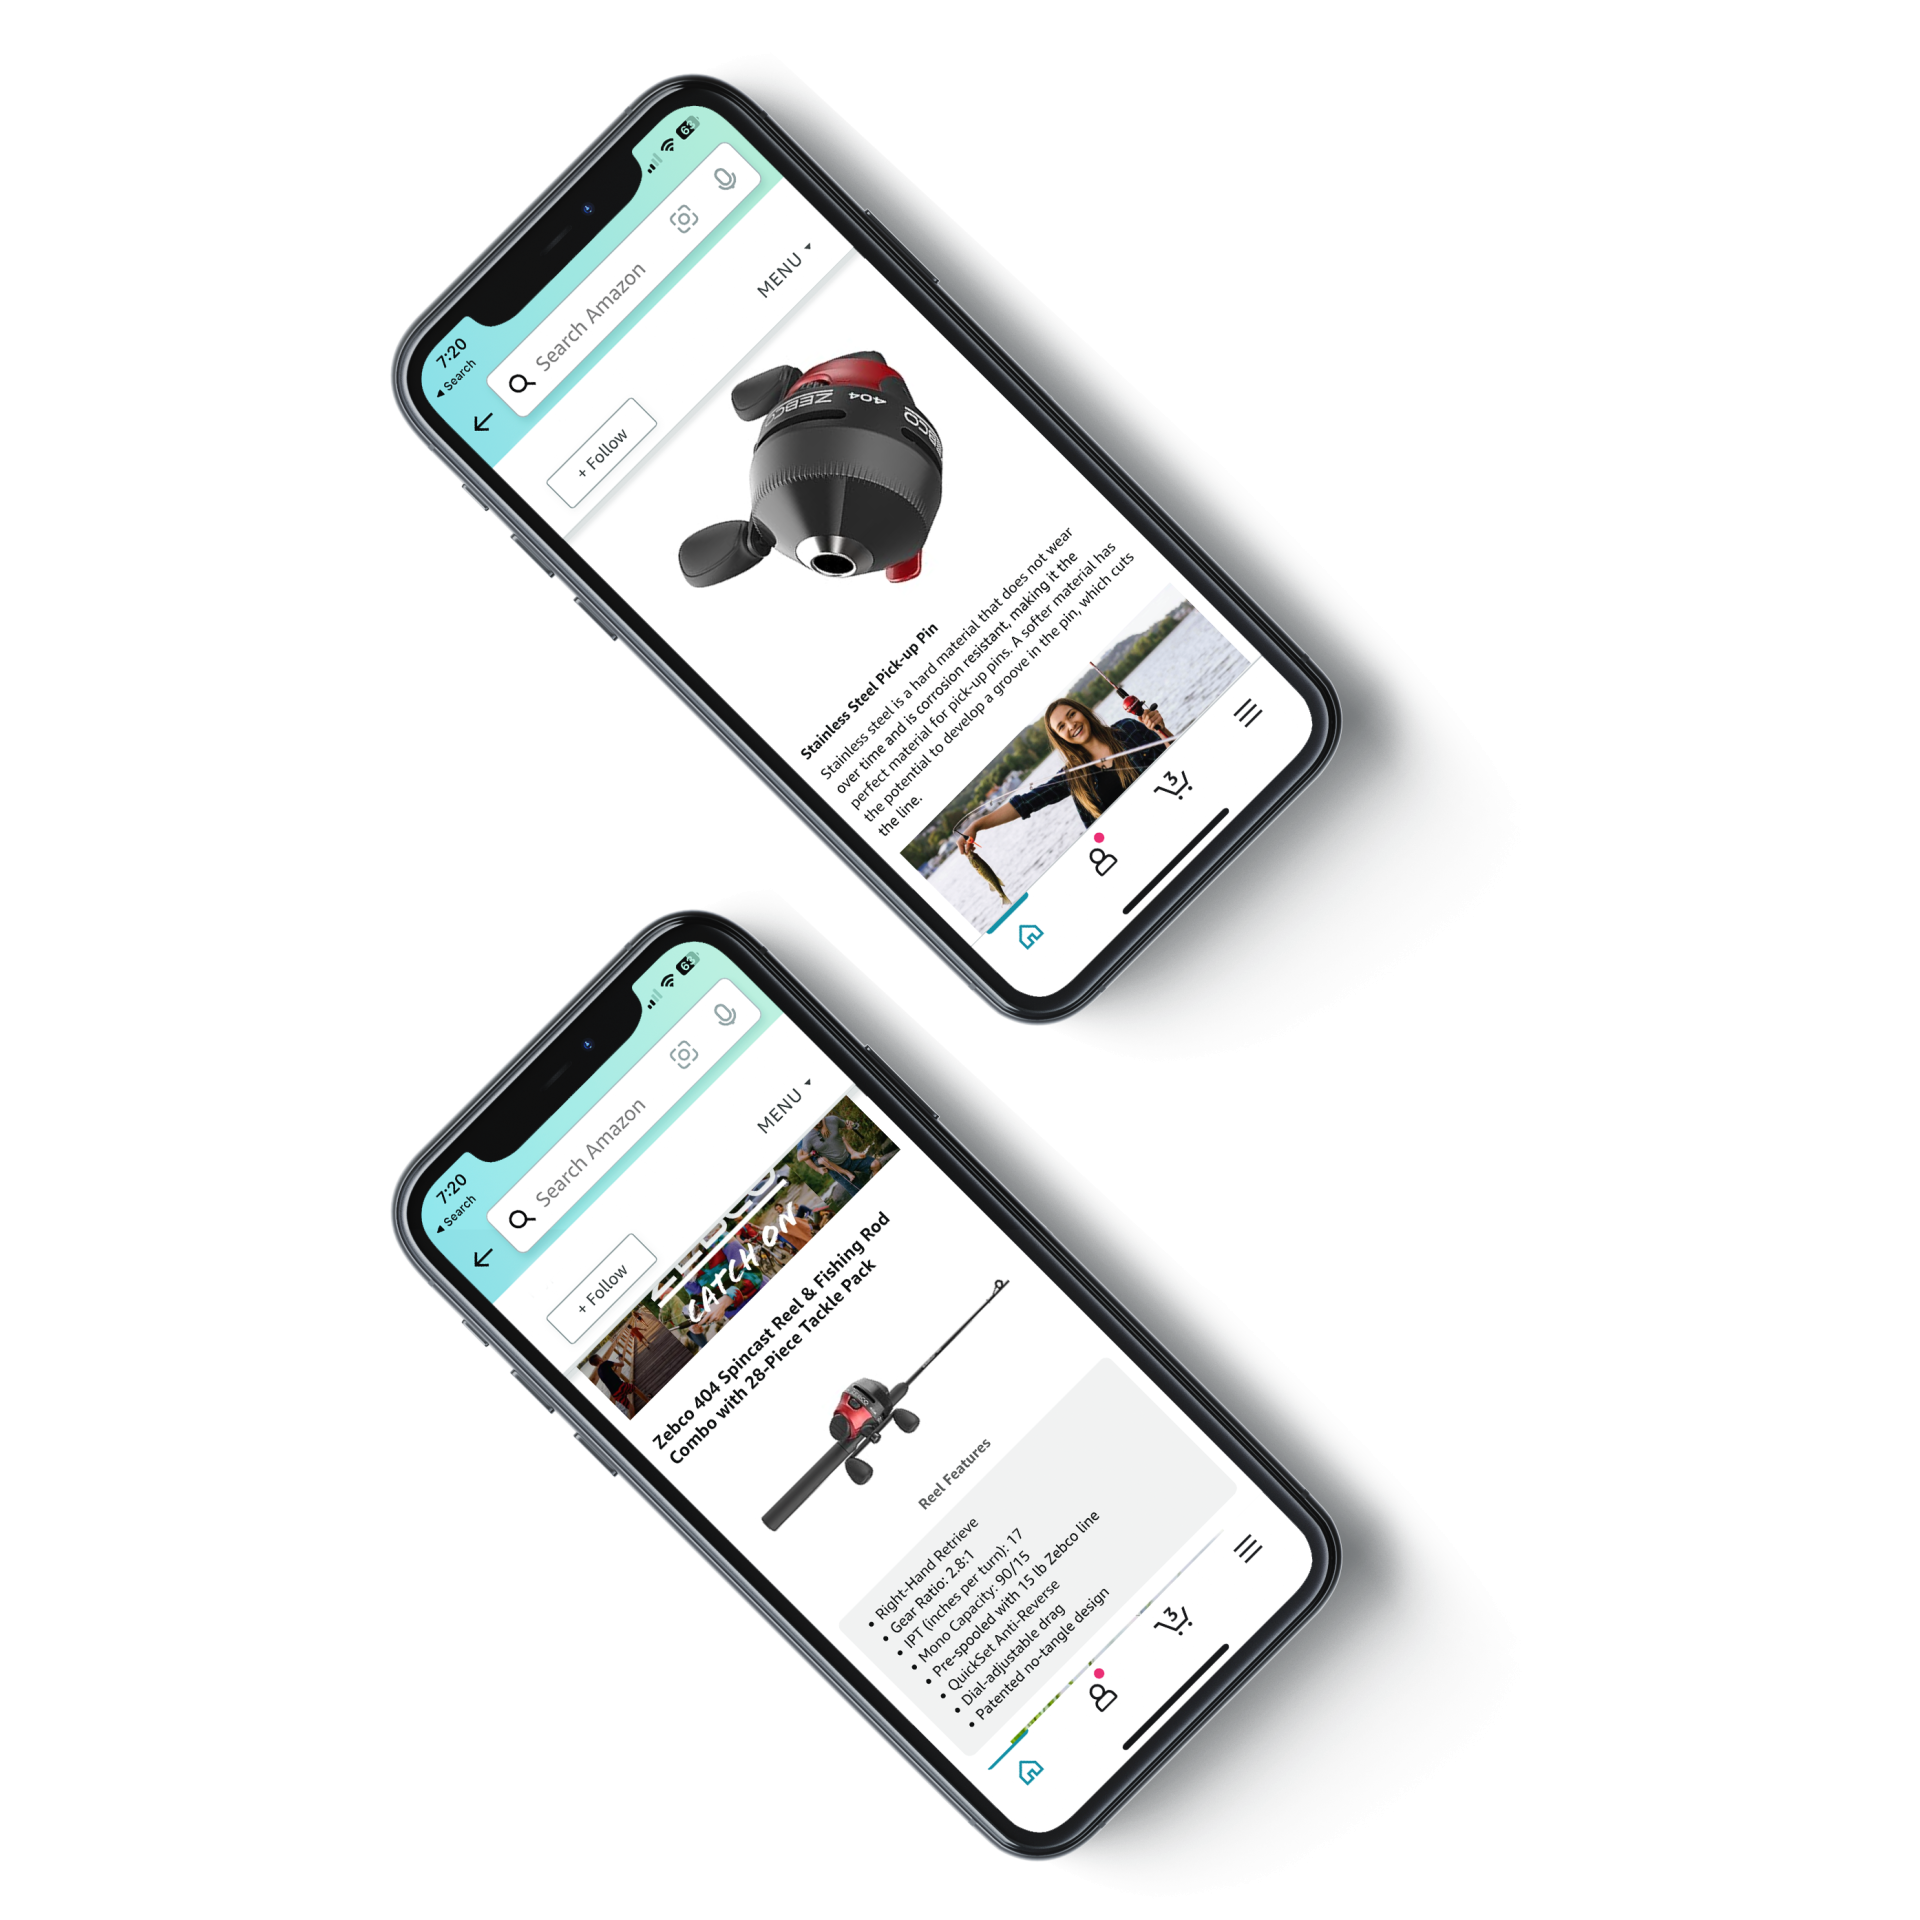 Two phones displaying an Amazon product page